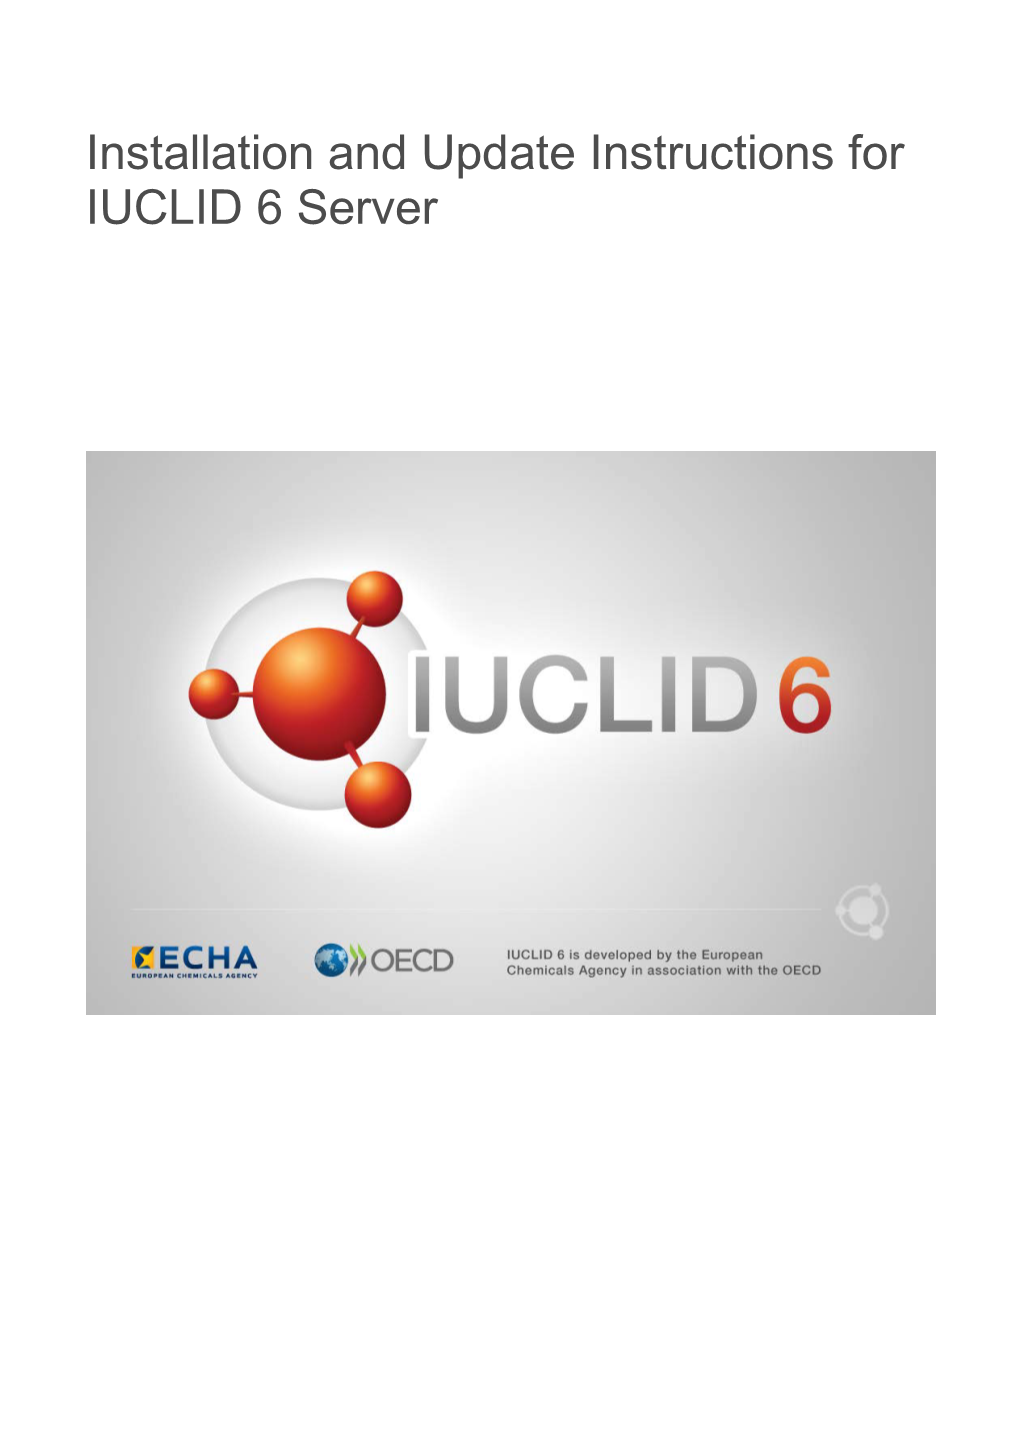 Installation and Update Instructions for IUCLID 6 Server